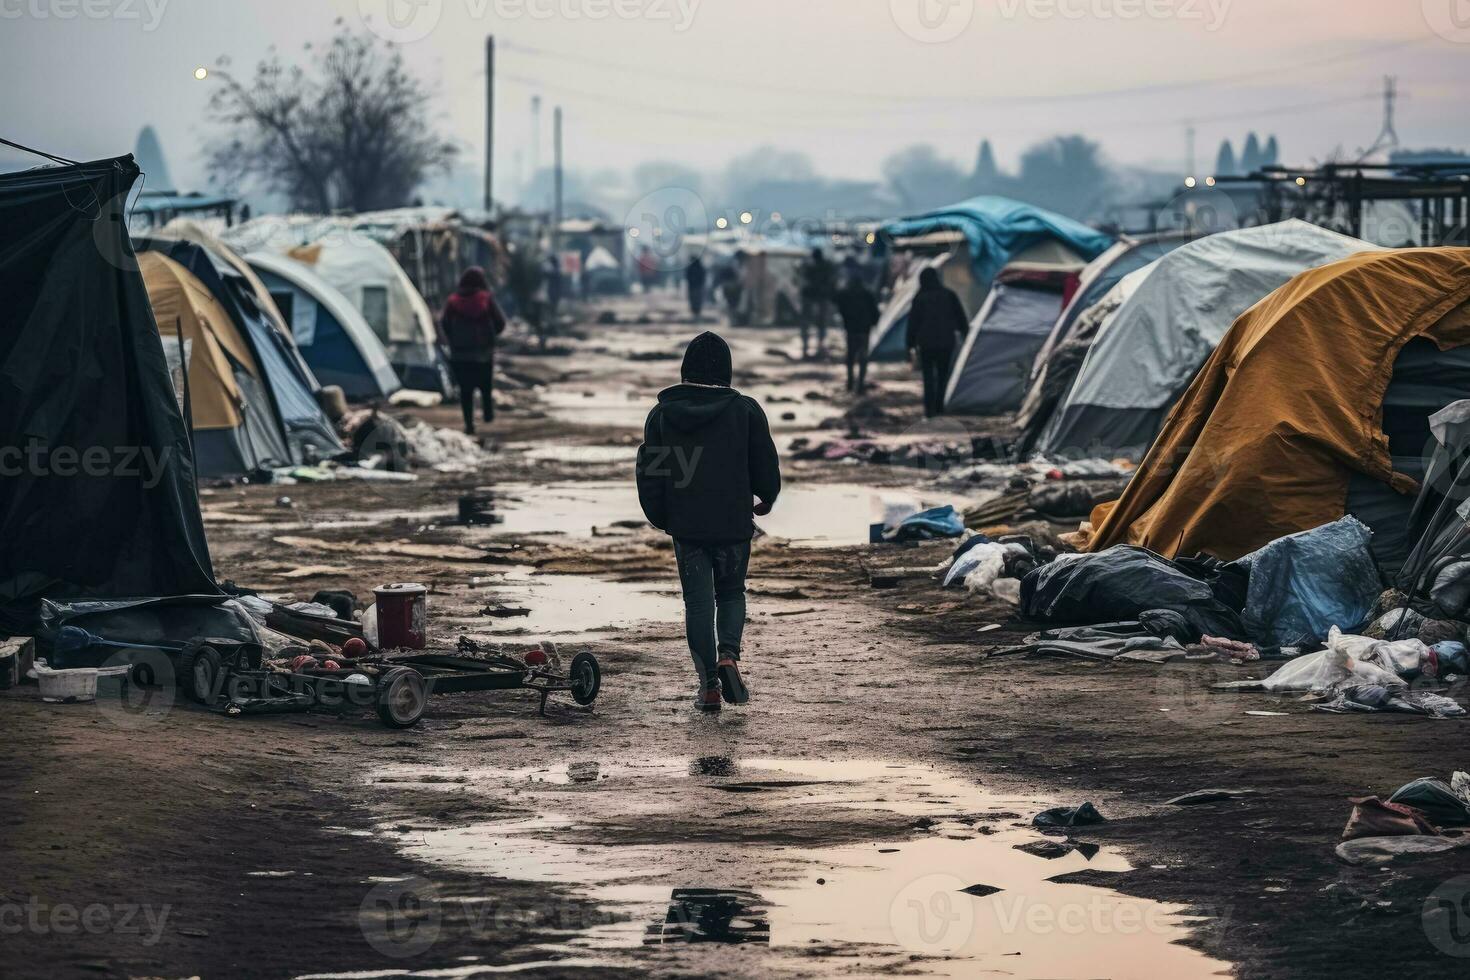 Refugee camp multitude of tents sheltering photo